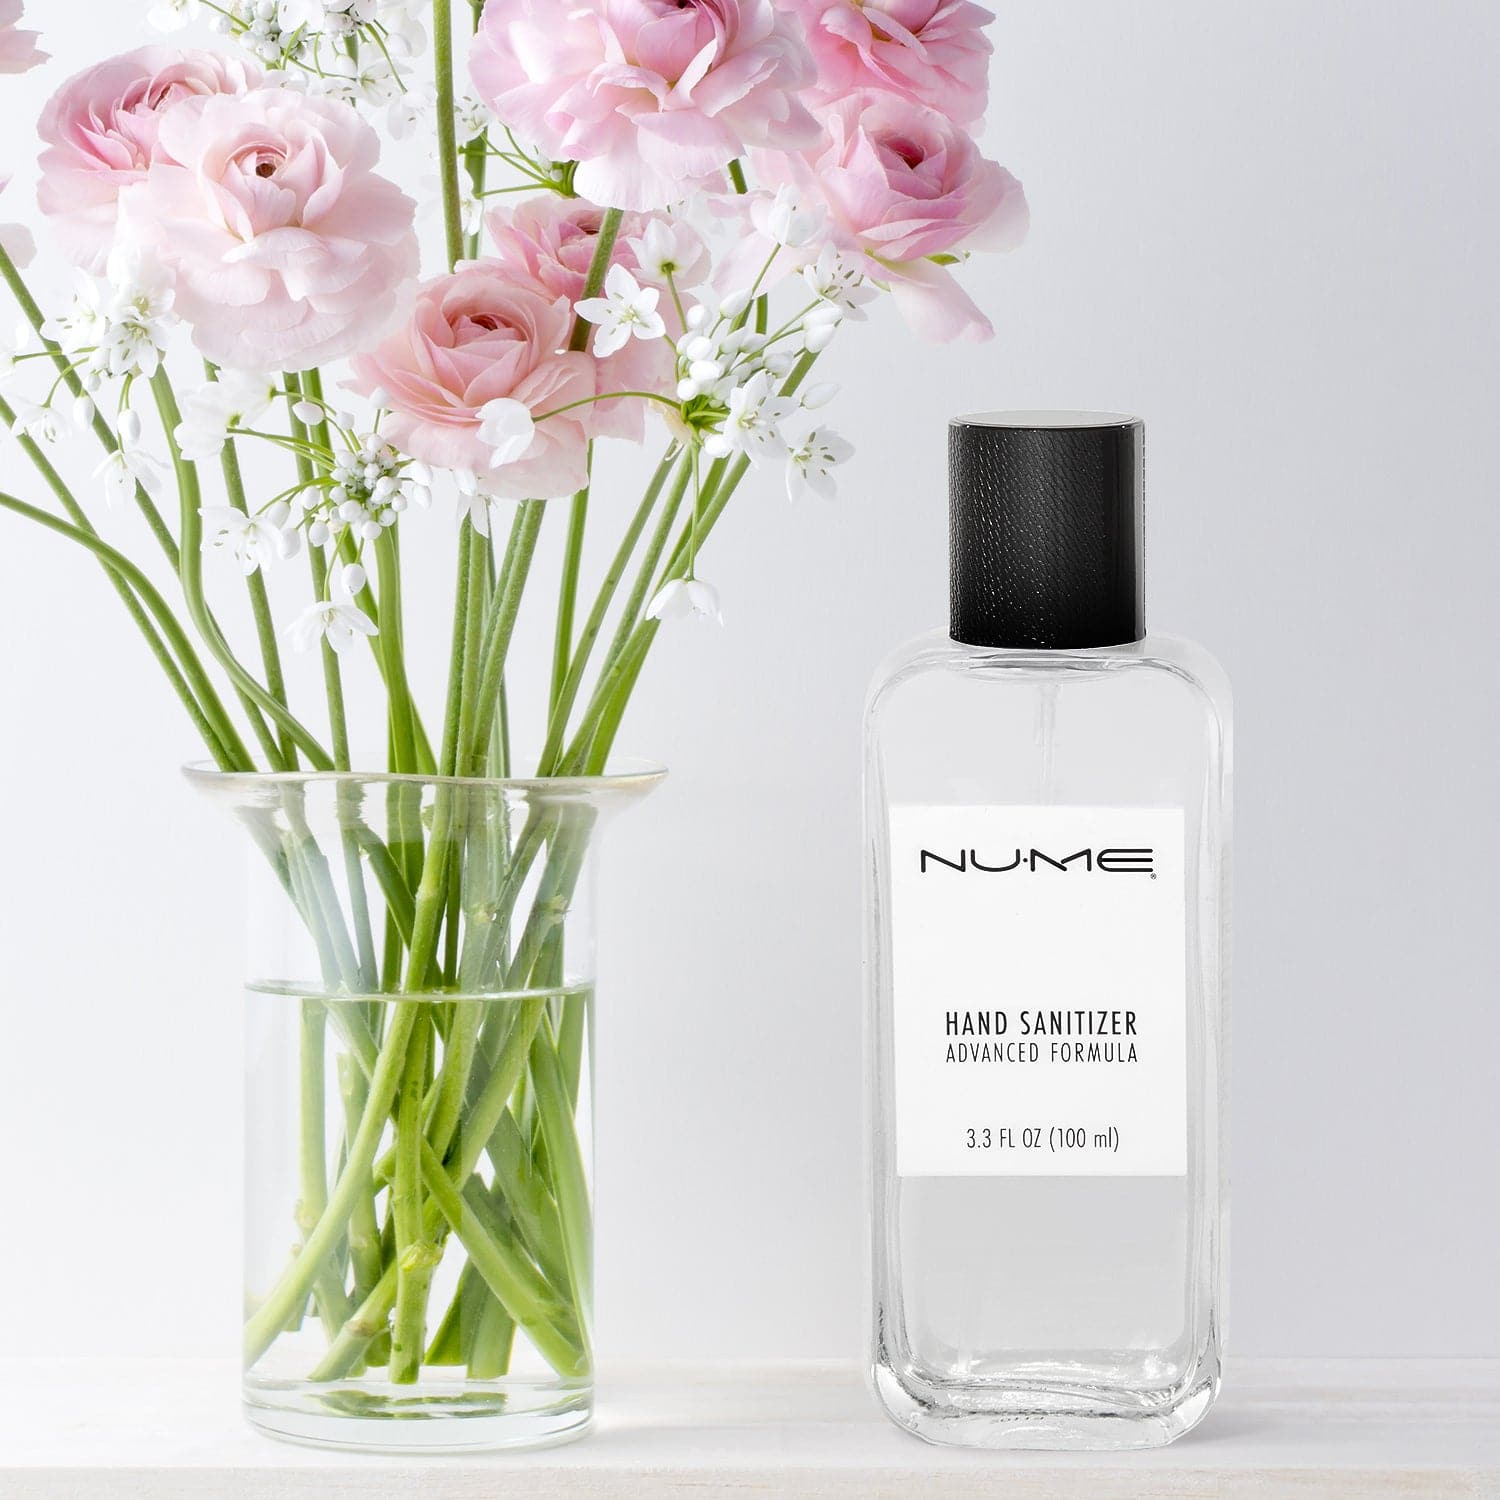  NuMe Ironmaid Sanitizer by NuMe NuMe Perfumarie